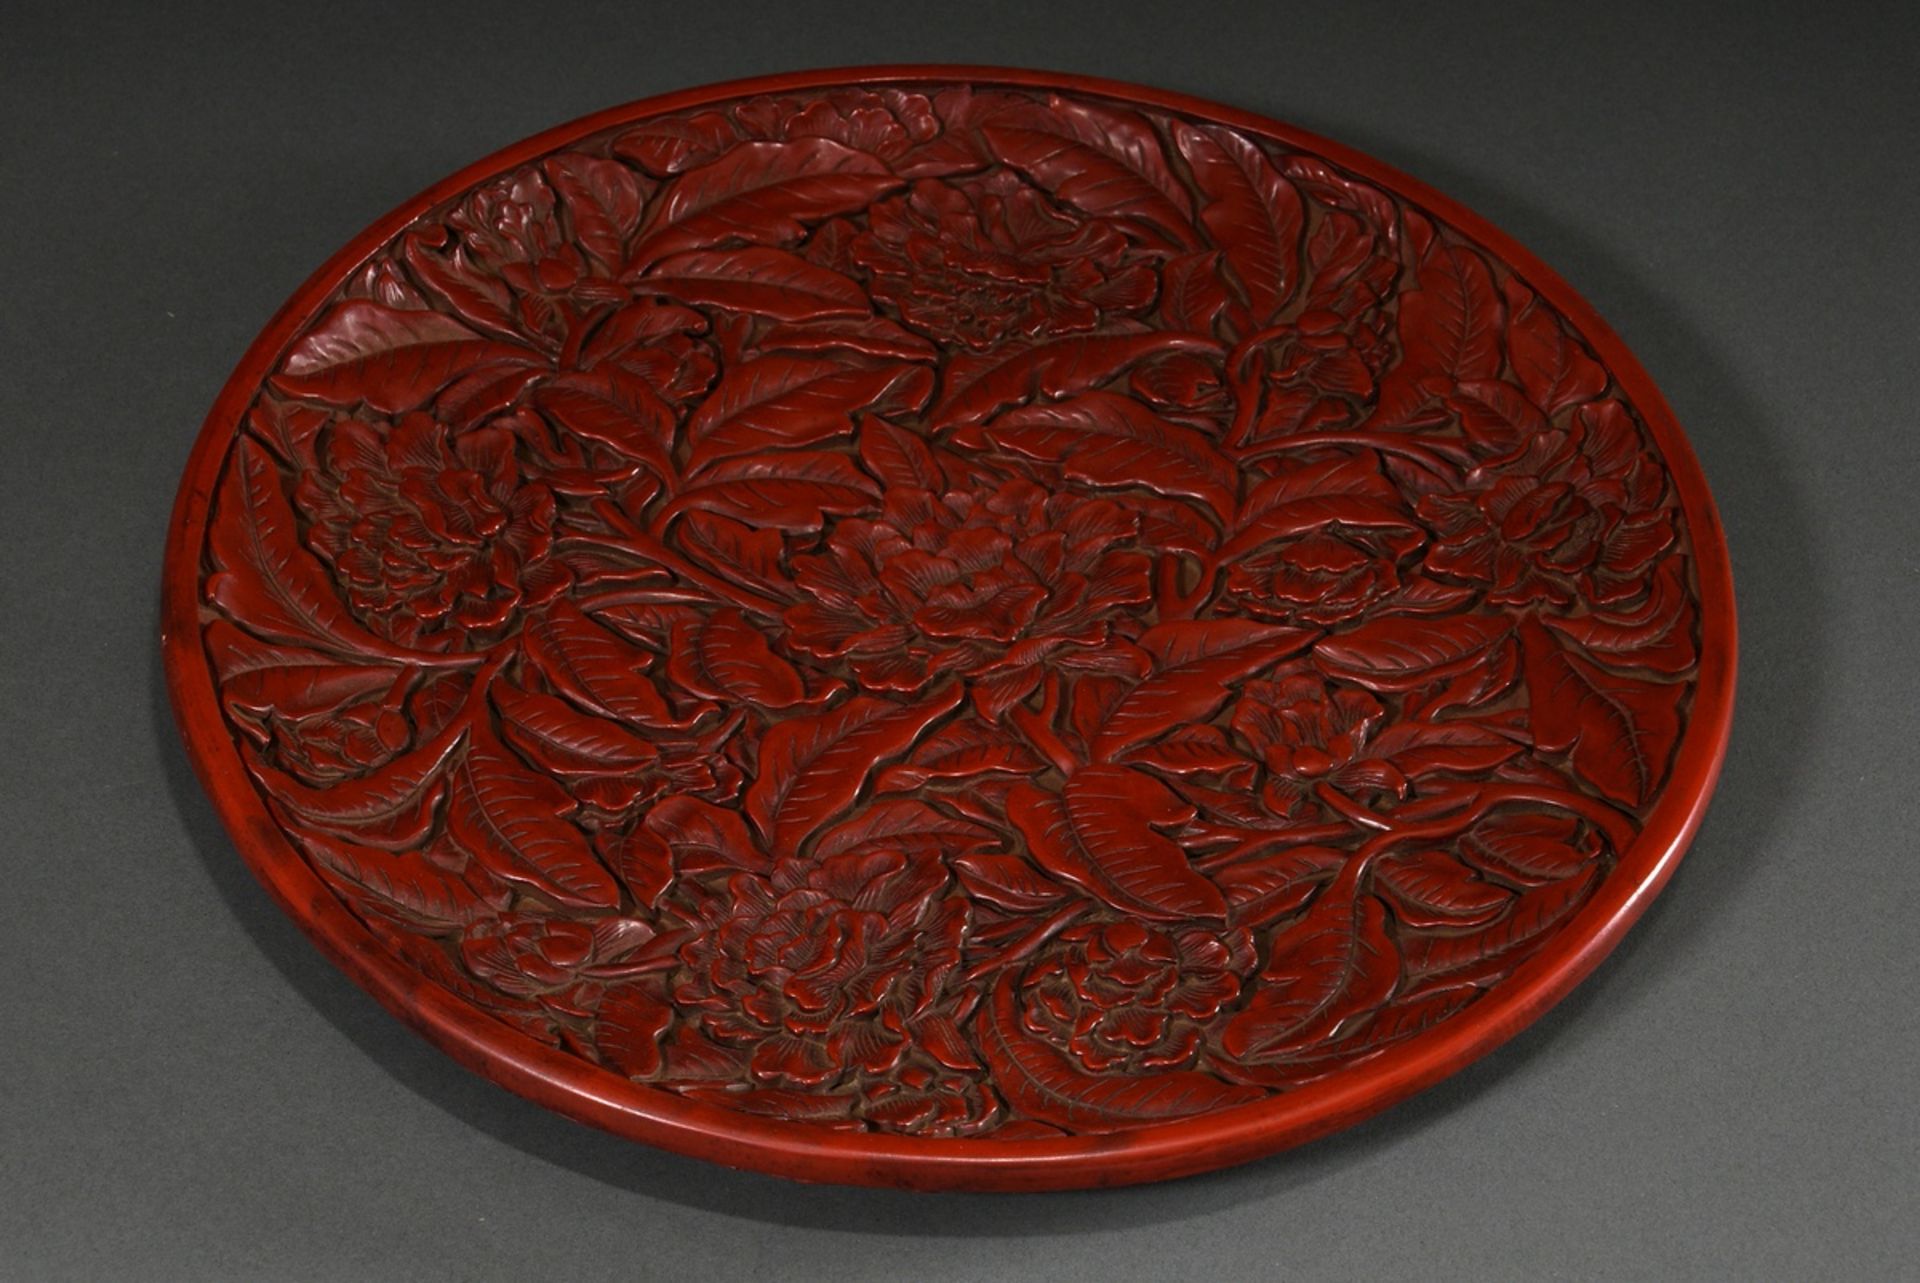 Red carved lacquer plate in the style of the early Ming period "Peonies", bottom with gold inscript - Image 3 of 5